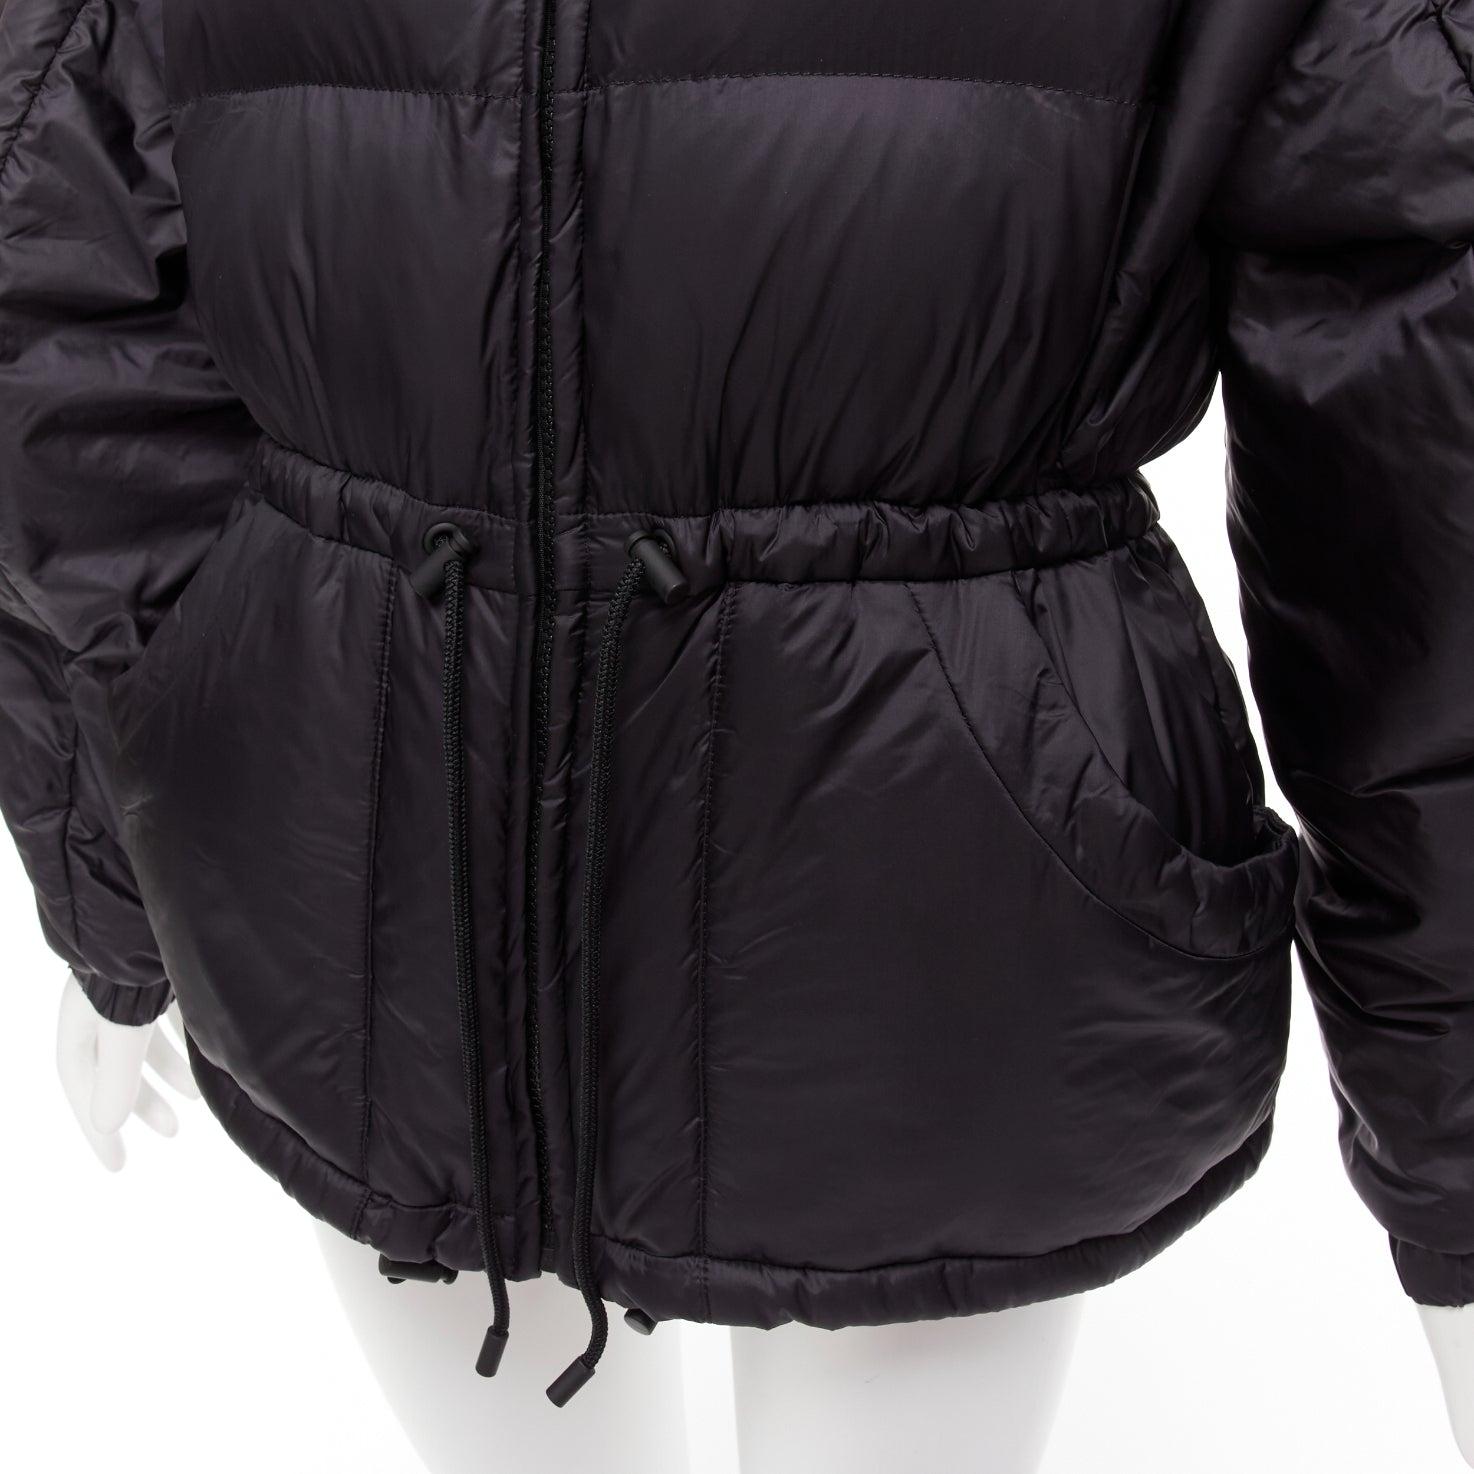 ISABEL MARANT Darsha Convertible samurai black quilted puffer padded shell jacket FR38 M
Reference: JYLM/A00057
Brand: Isabel Marant
Model: Darsha
Material: Nylon
Color: Black
Pattern: Solid
Closure: Zip
Lining: Black Fabric
Extra Details: Quilted